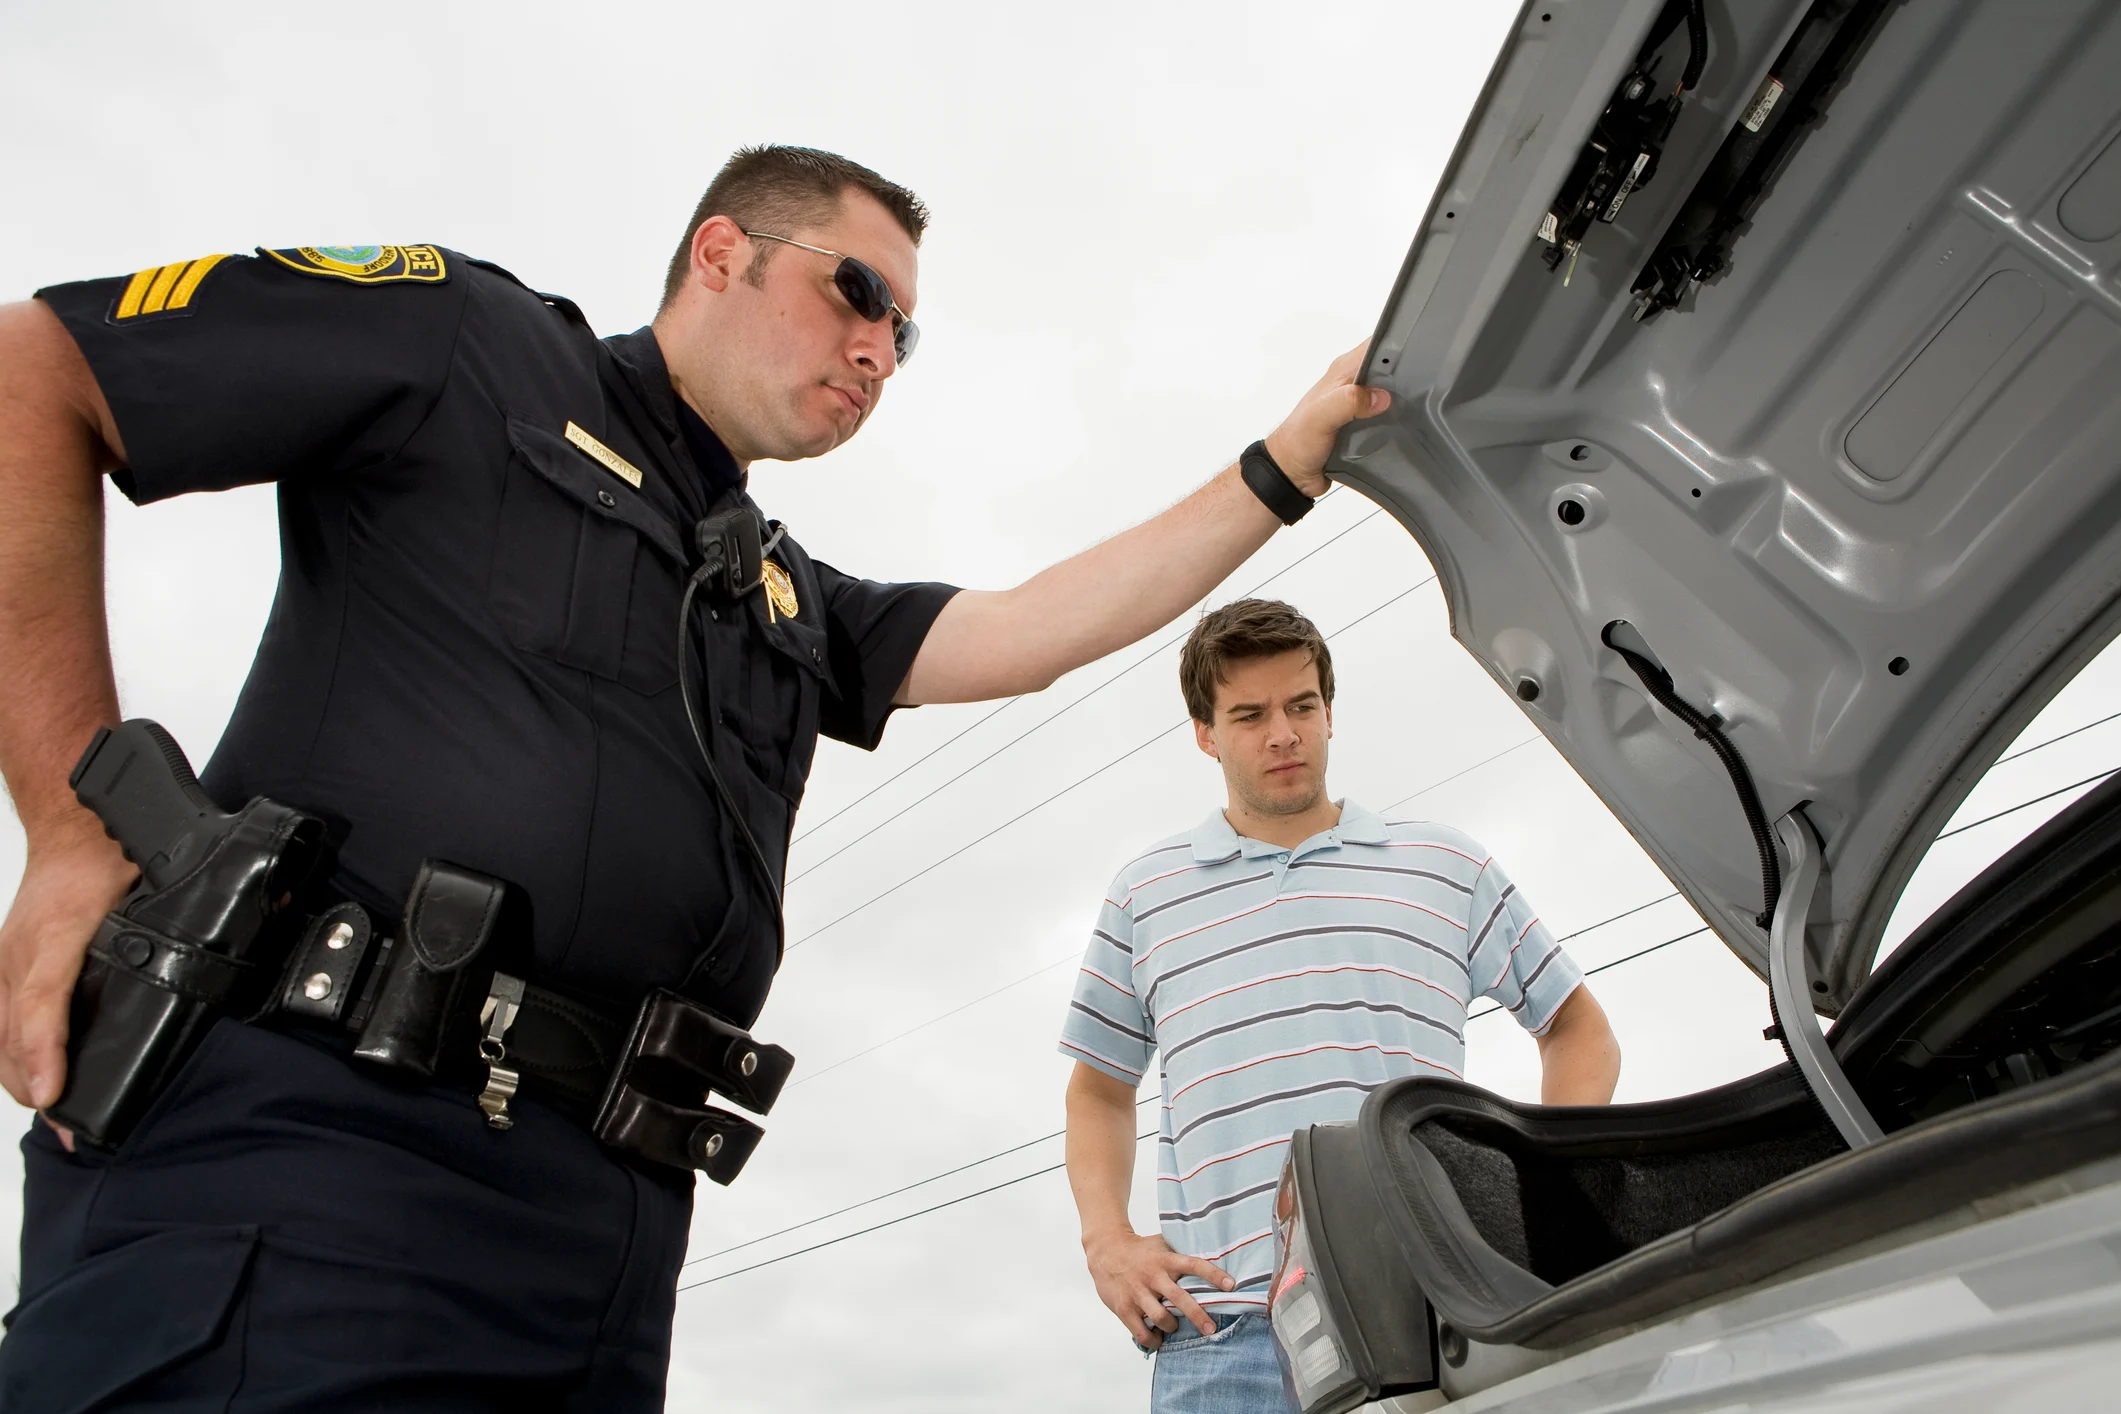 Did Law Enforcement Search Your Locked Trunk or Glovebox Without a Warrant?